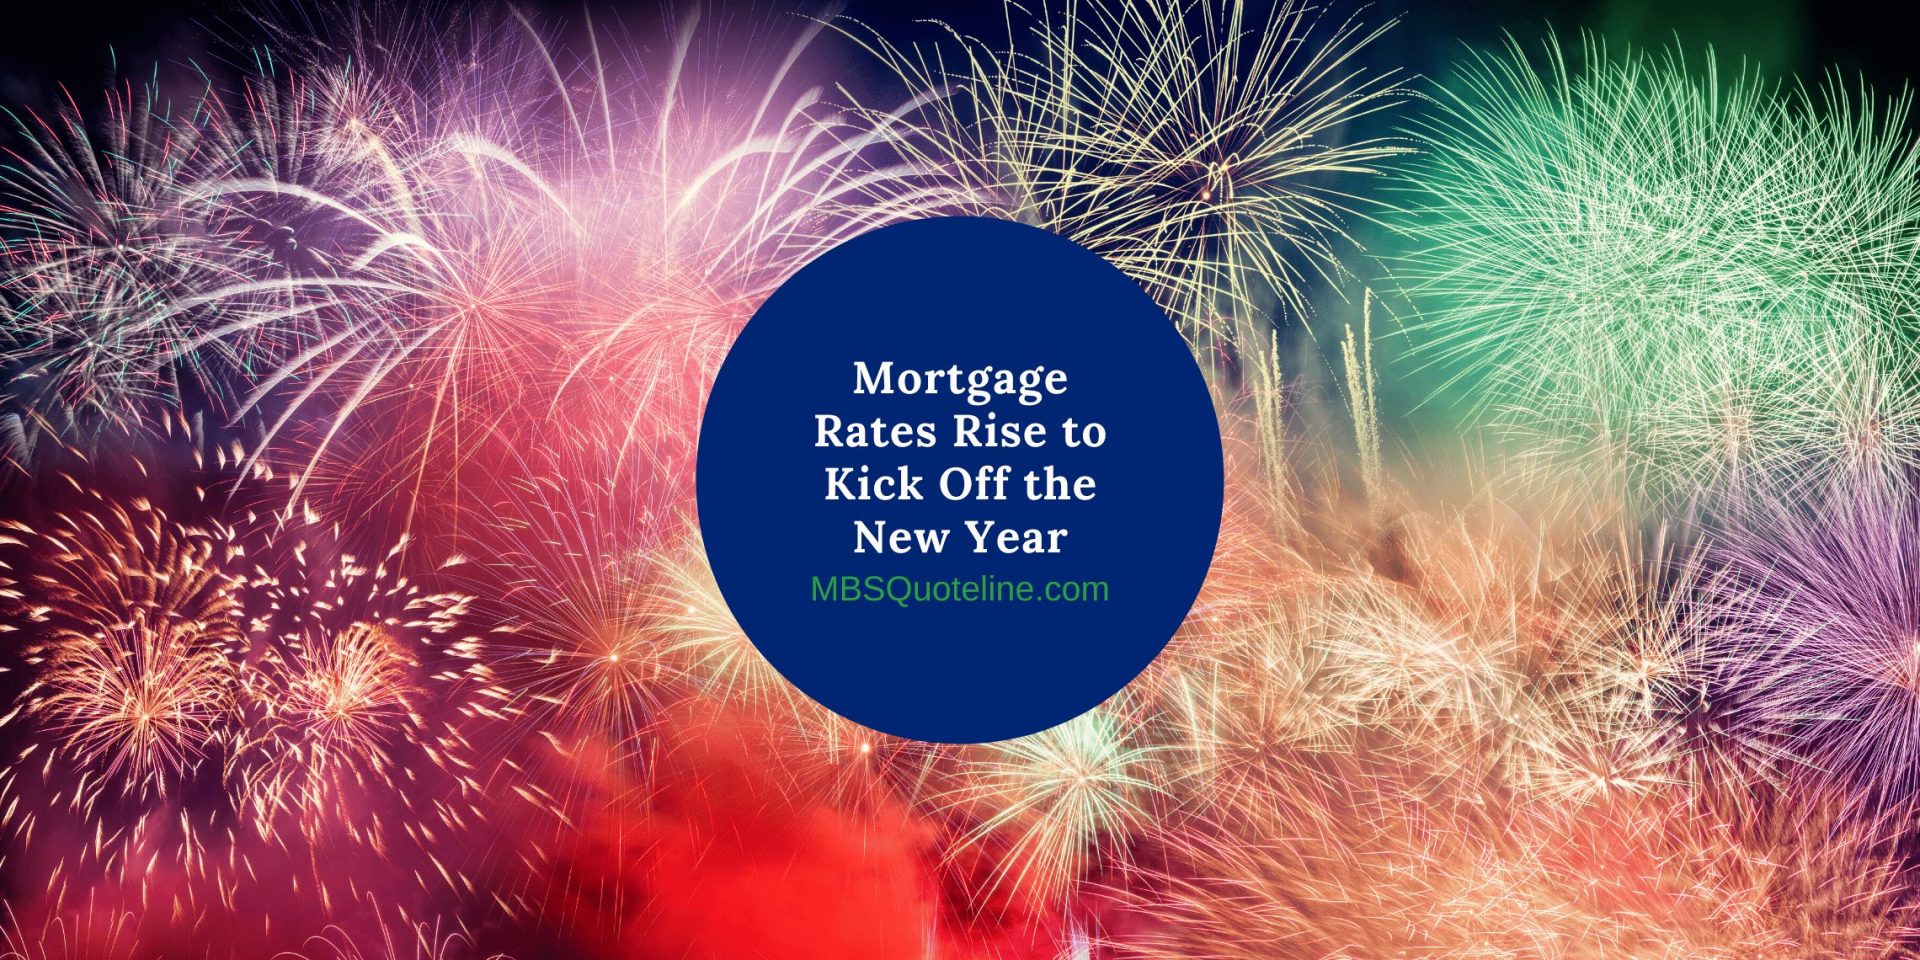 mortgage rates rise kick off new year mortgagetime mbsquoteline featured